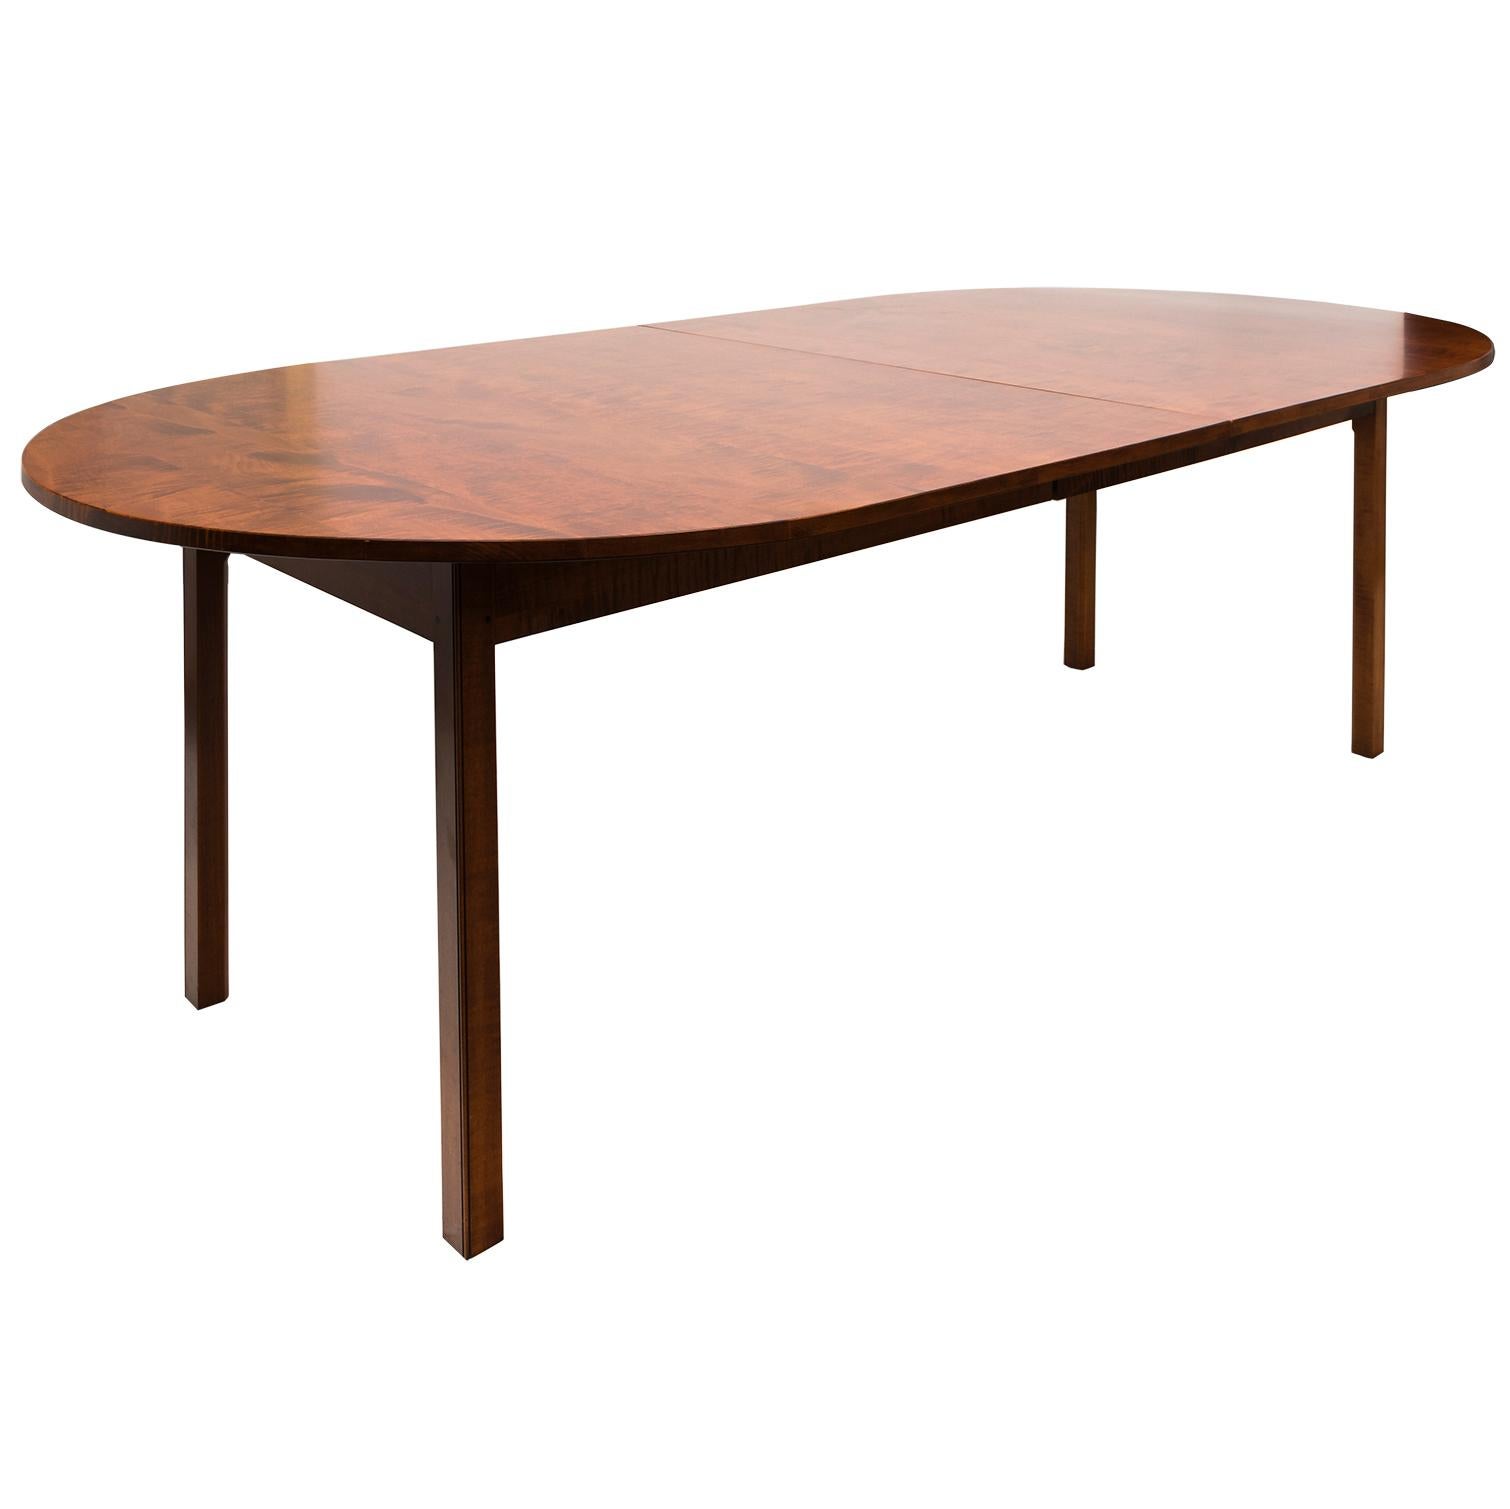 Tiger Maple Dining Room Table by David Lefort, circa 2000